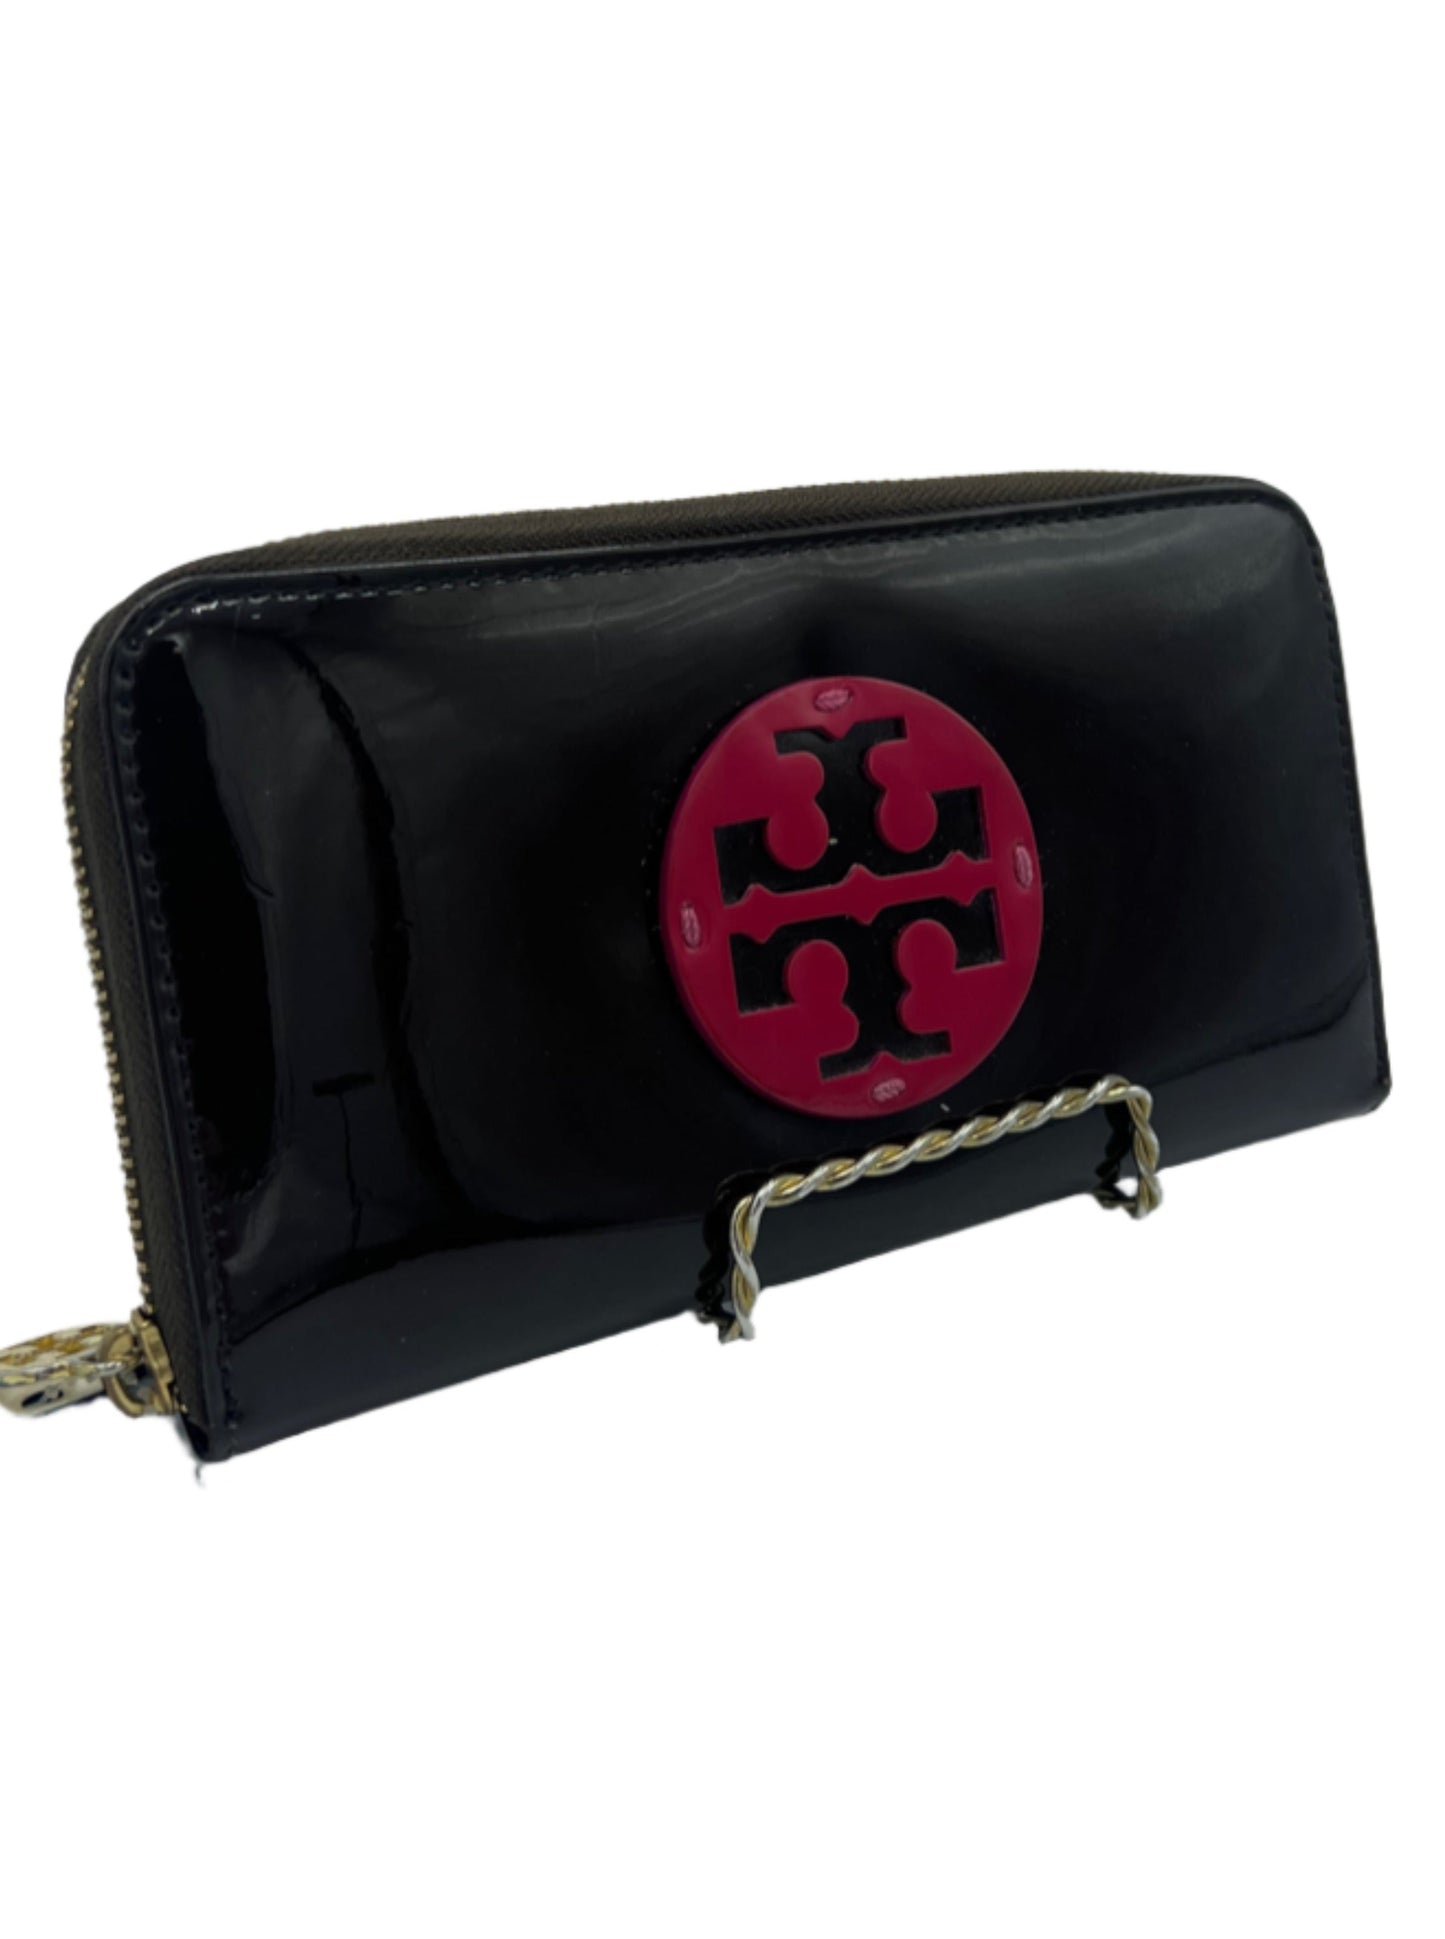 Tory Burch patent Leather Brown Wallet